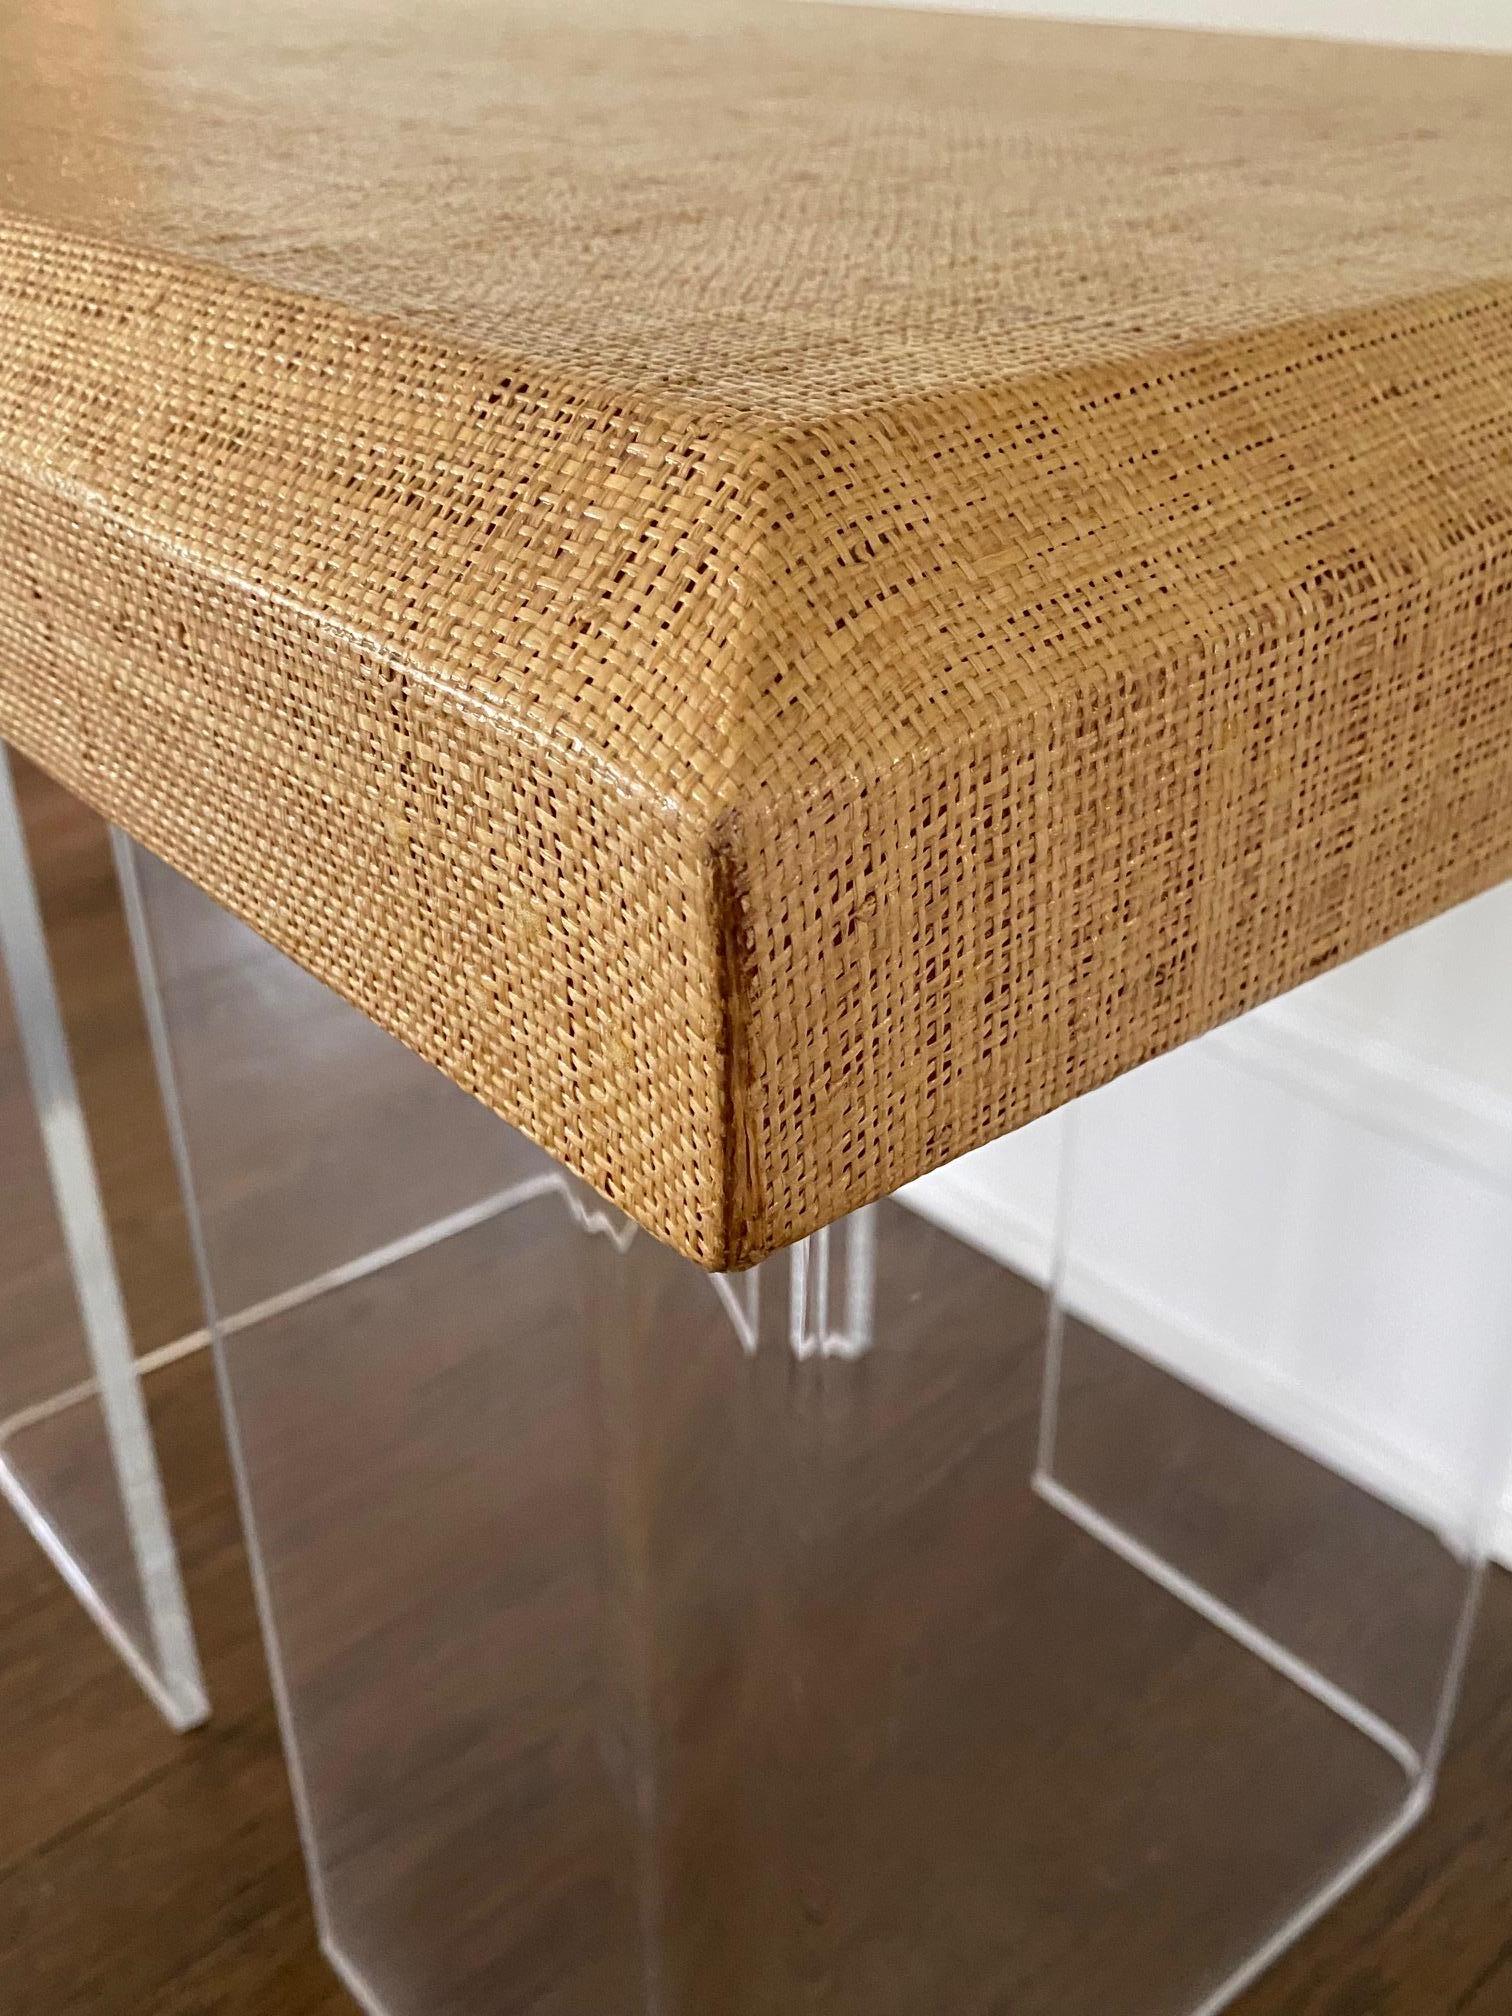  Chic Mid Century Modern Lucite & Laminated Raffia Table For Sale 5